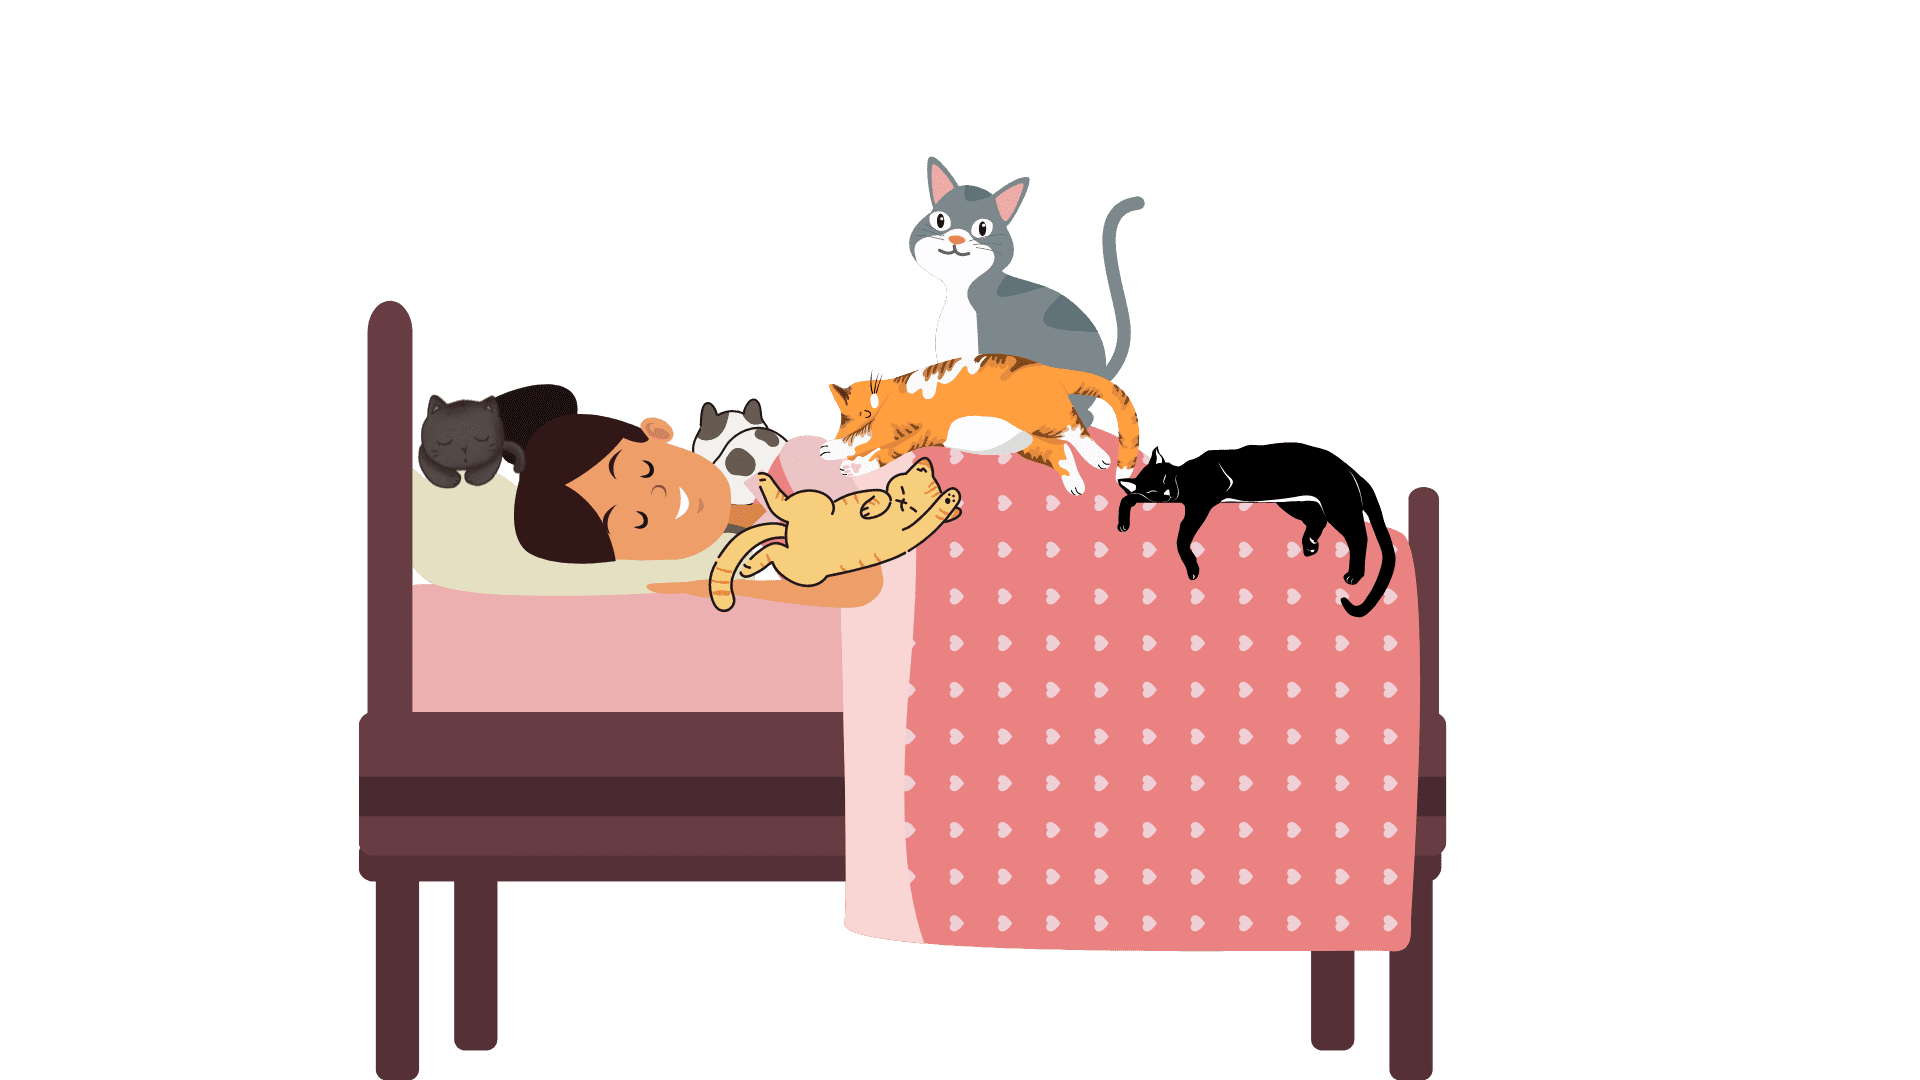 Bedtime with my cats